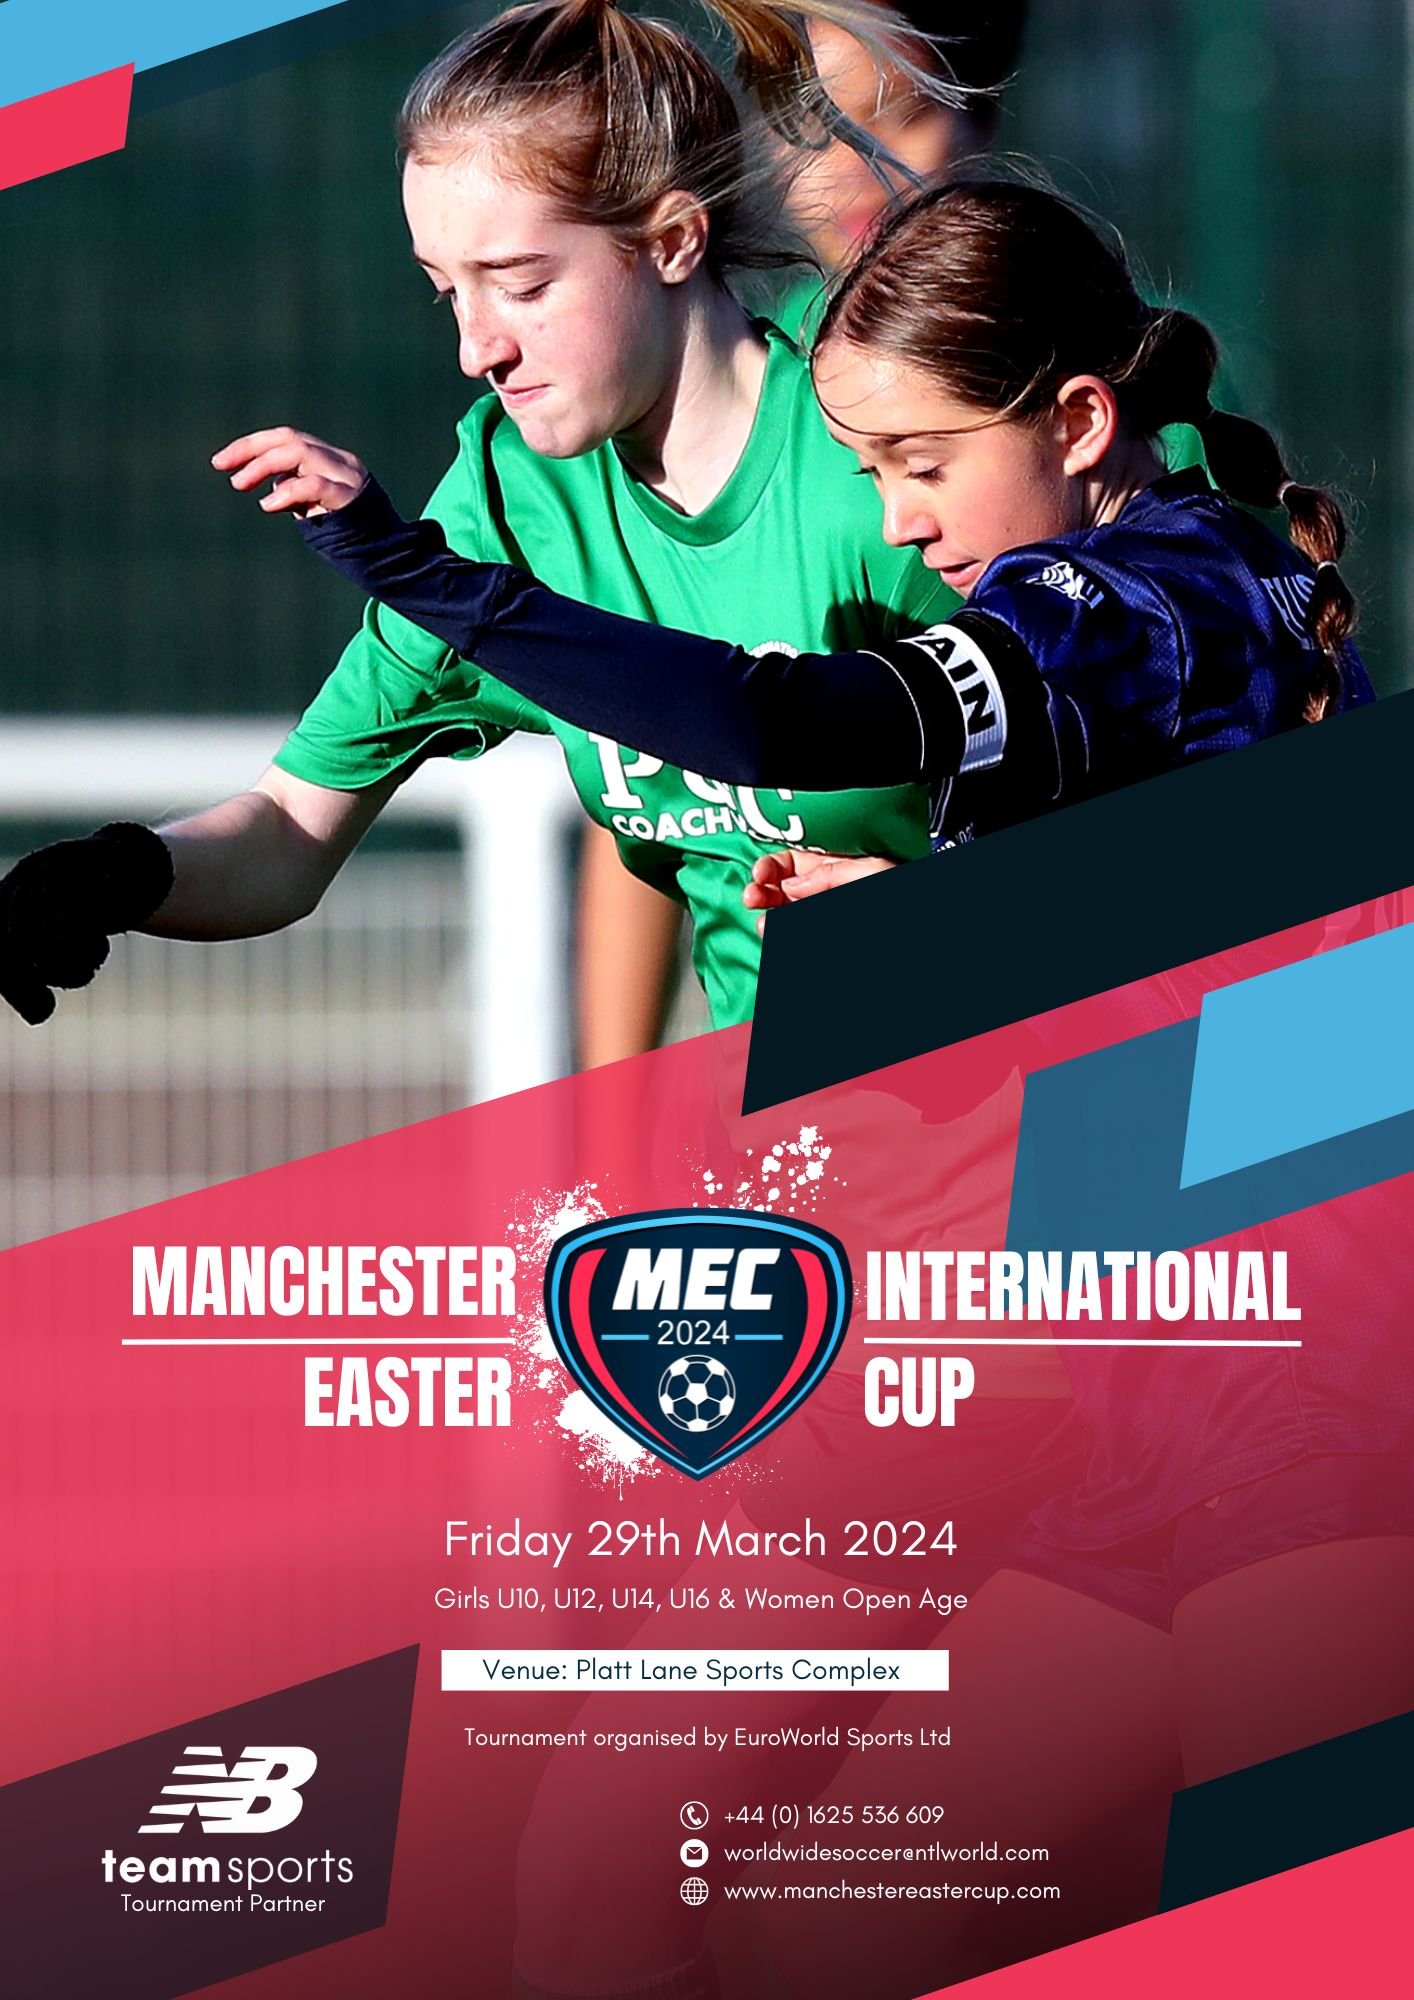 2024 Manchester Easter Cup - girls only and women's open age competition